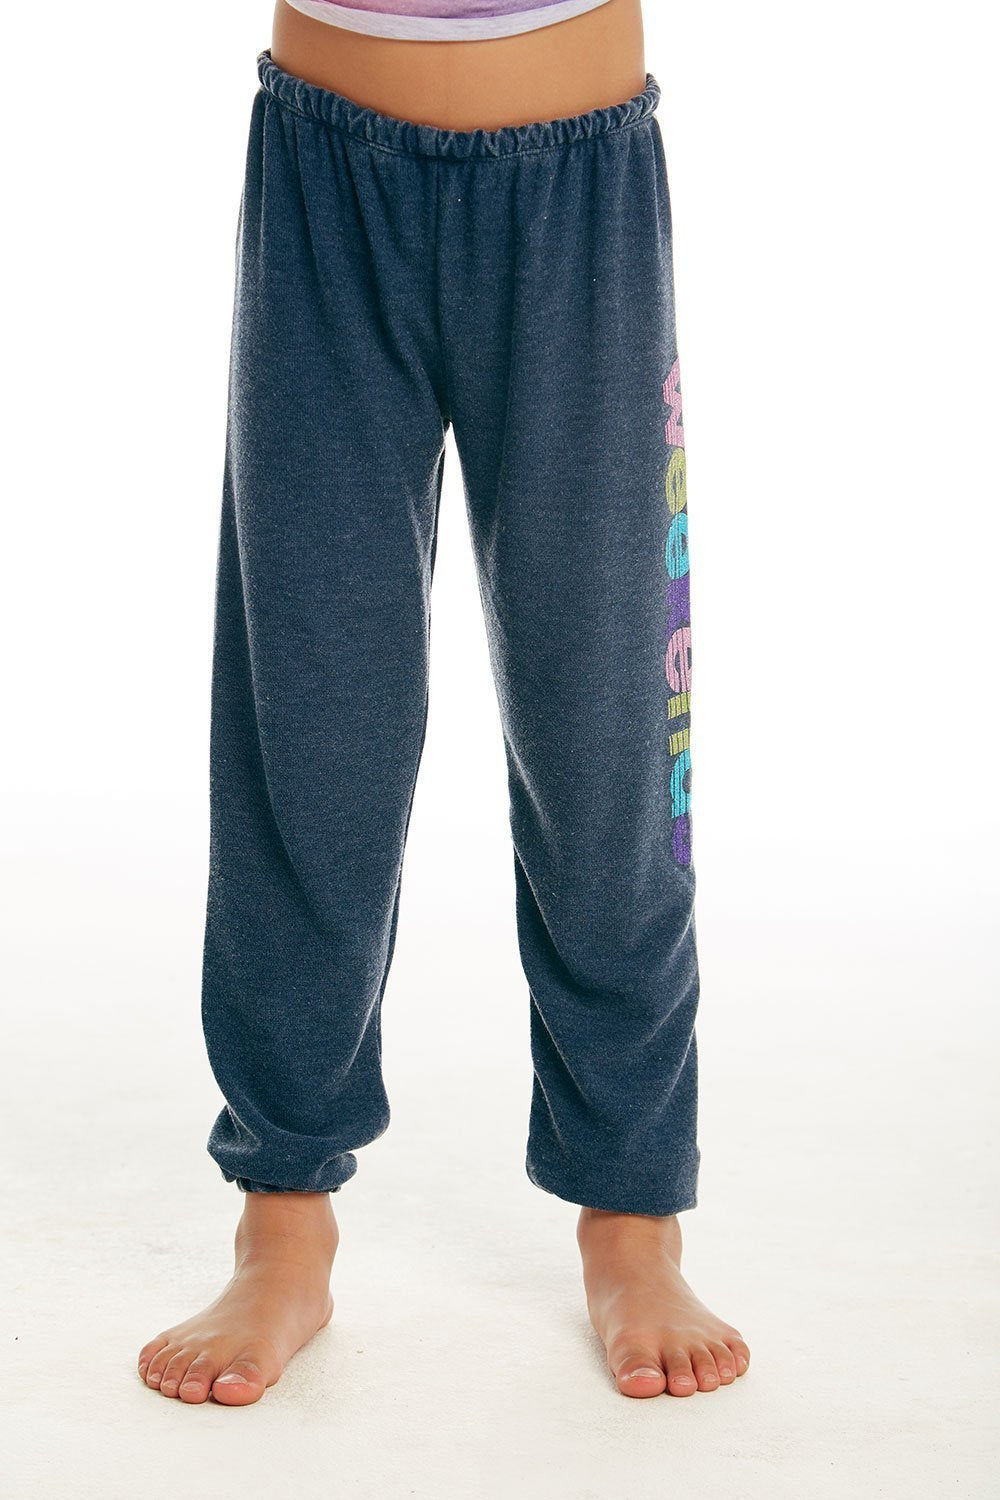 CHASER KIDS - Girls Cozy Knit Lounge Pant in Avalon